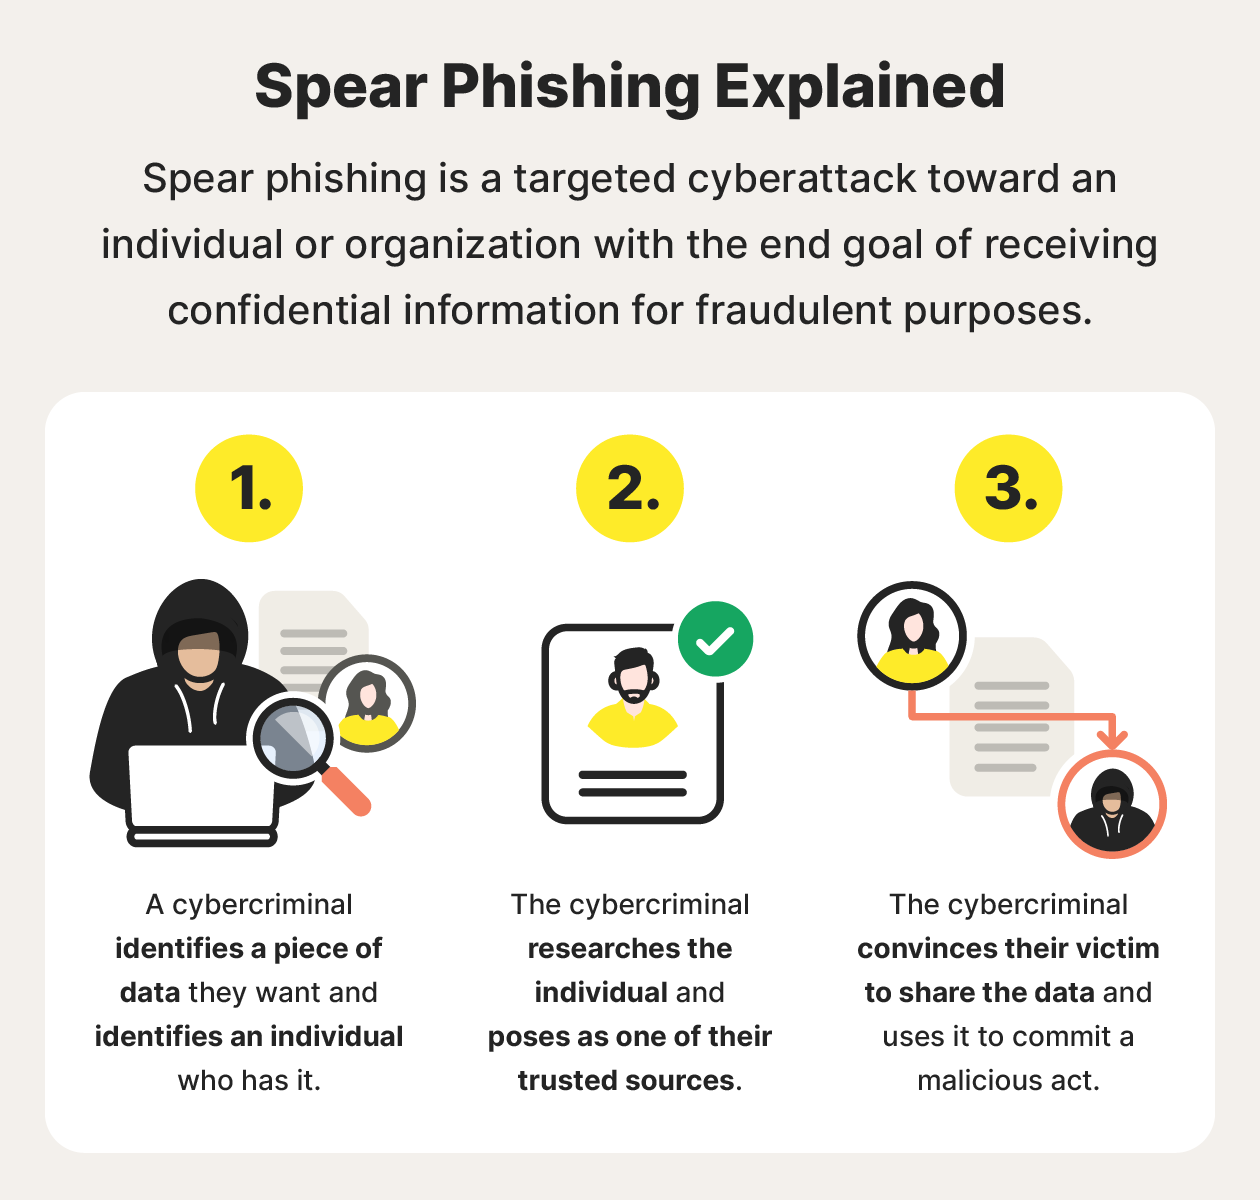 How spear phishing works: victim is identified, cybercriminal poses as trusted source, victim provides confidential data.